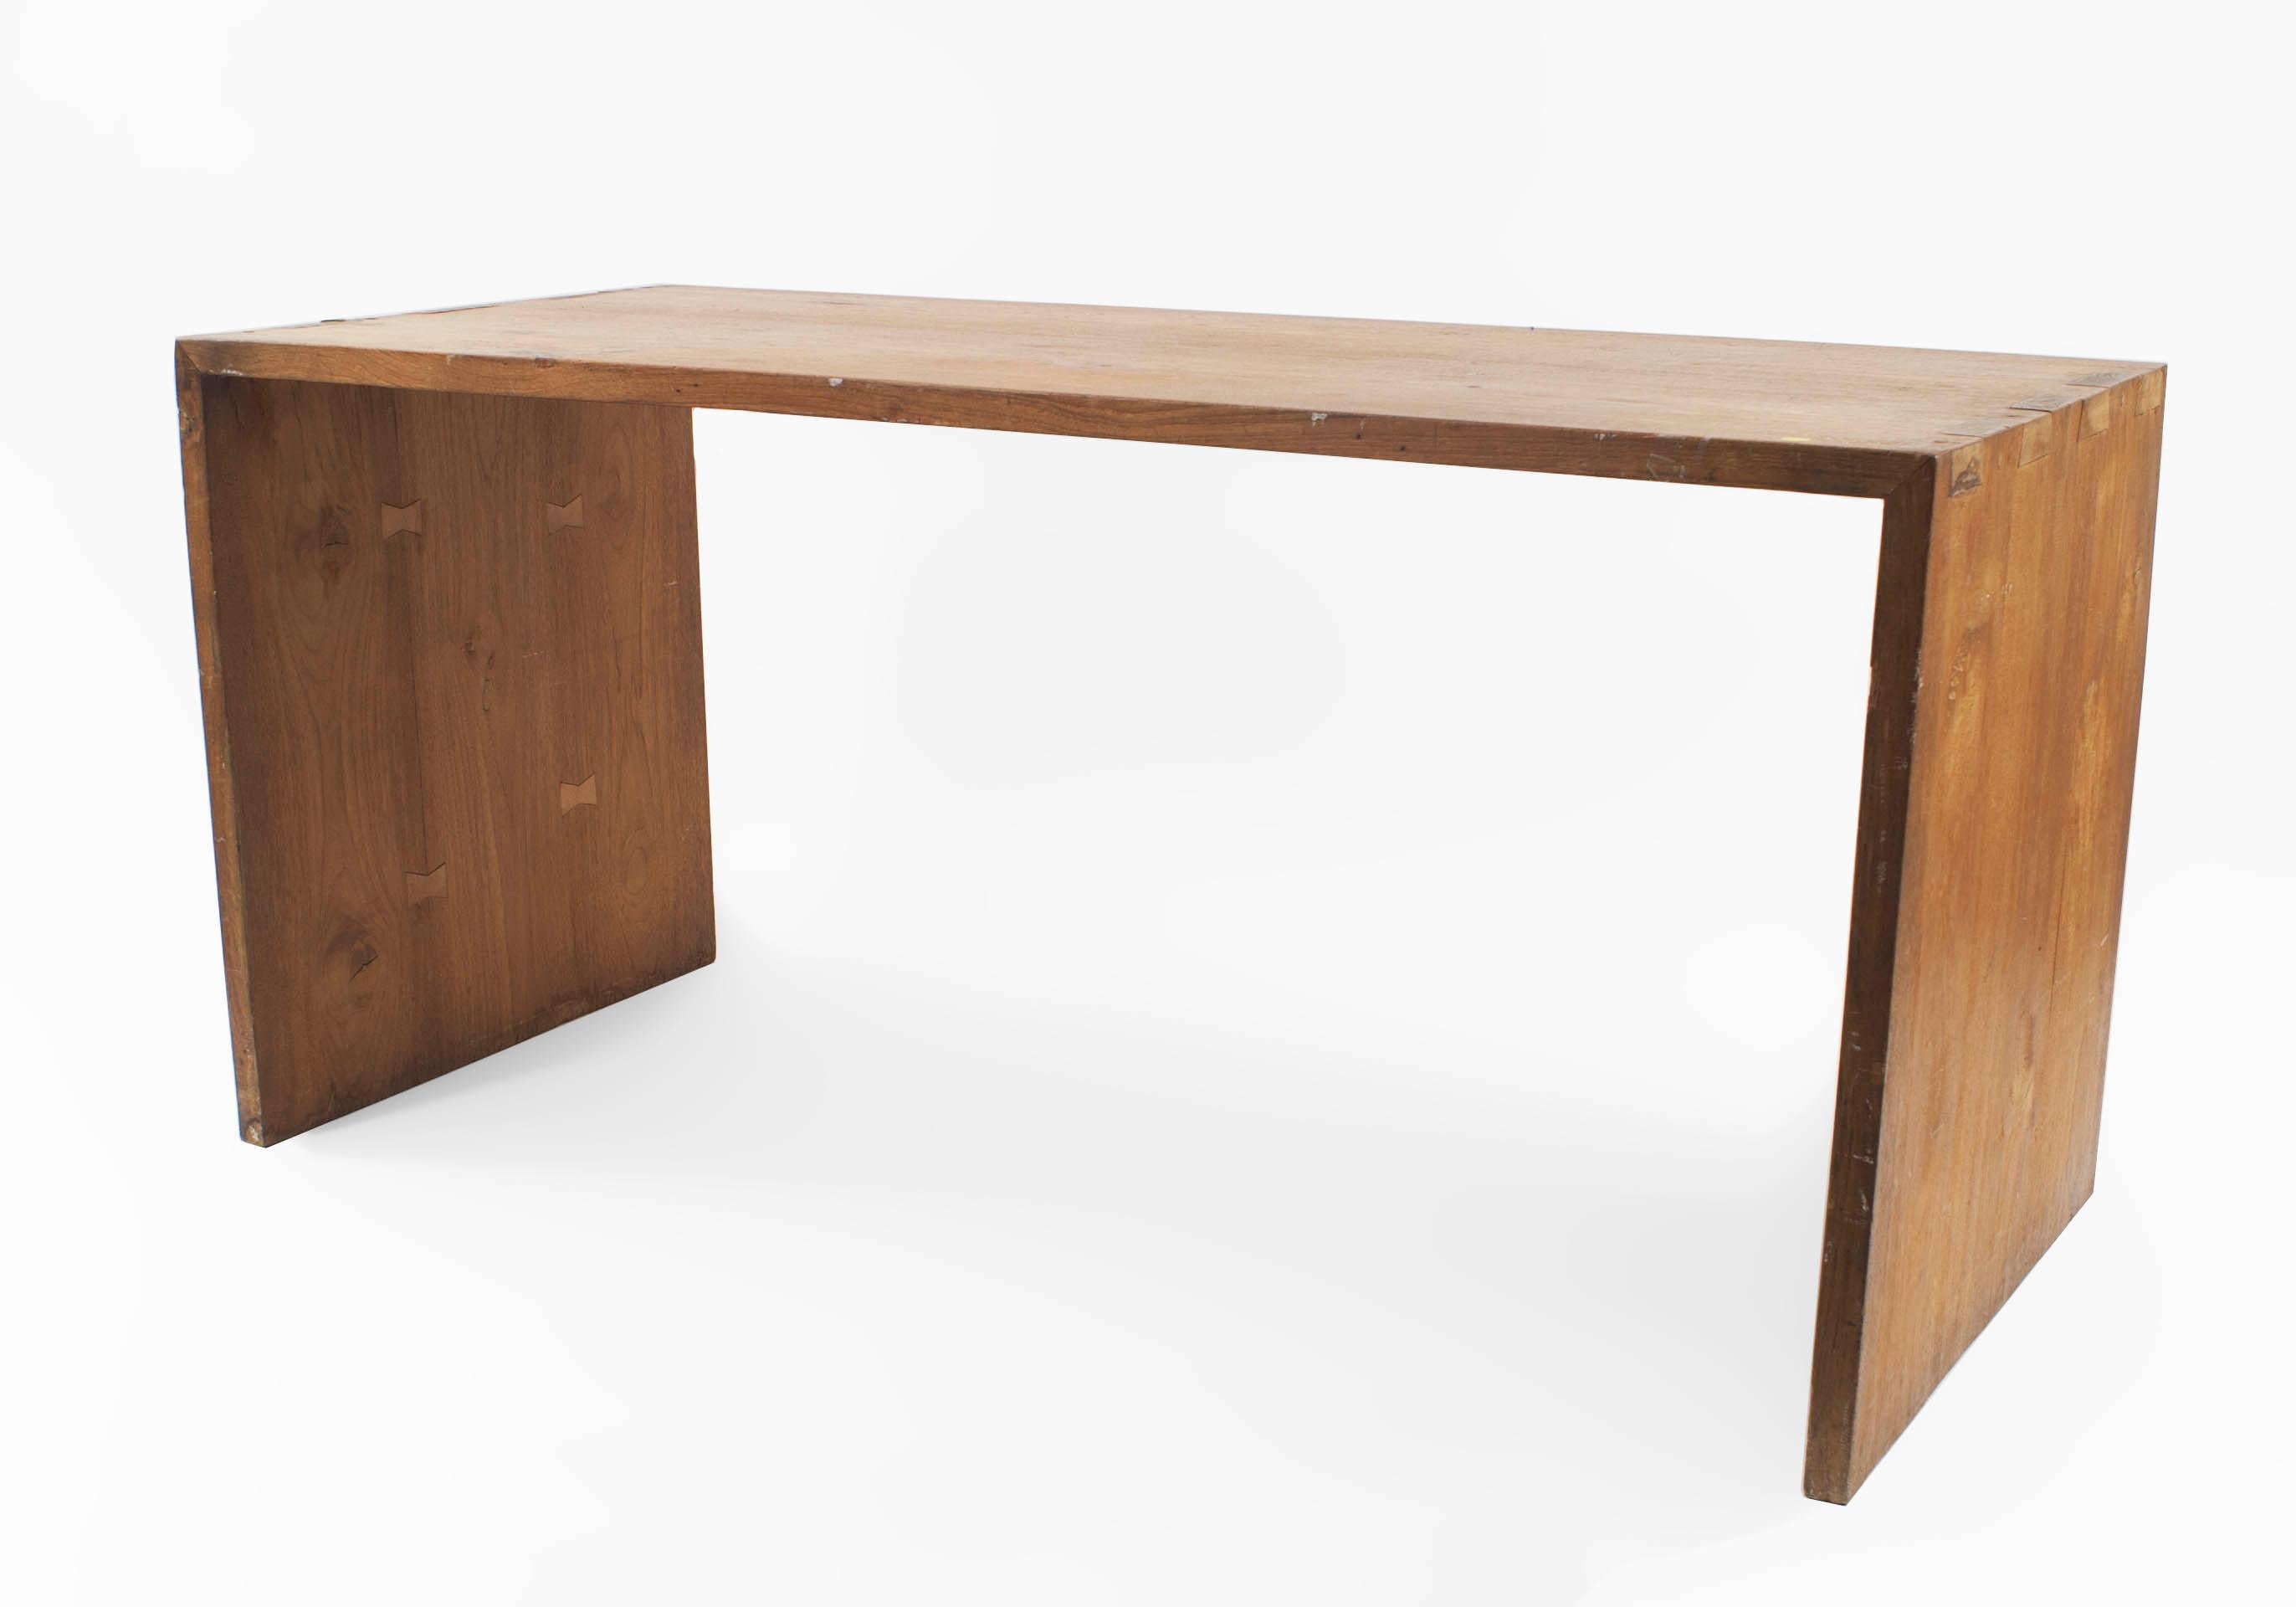 Post-War minimal dark stained pine work table desk with dovetail construction connecting the top to the side panels.
